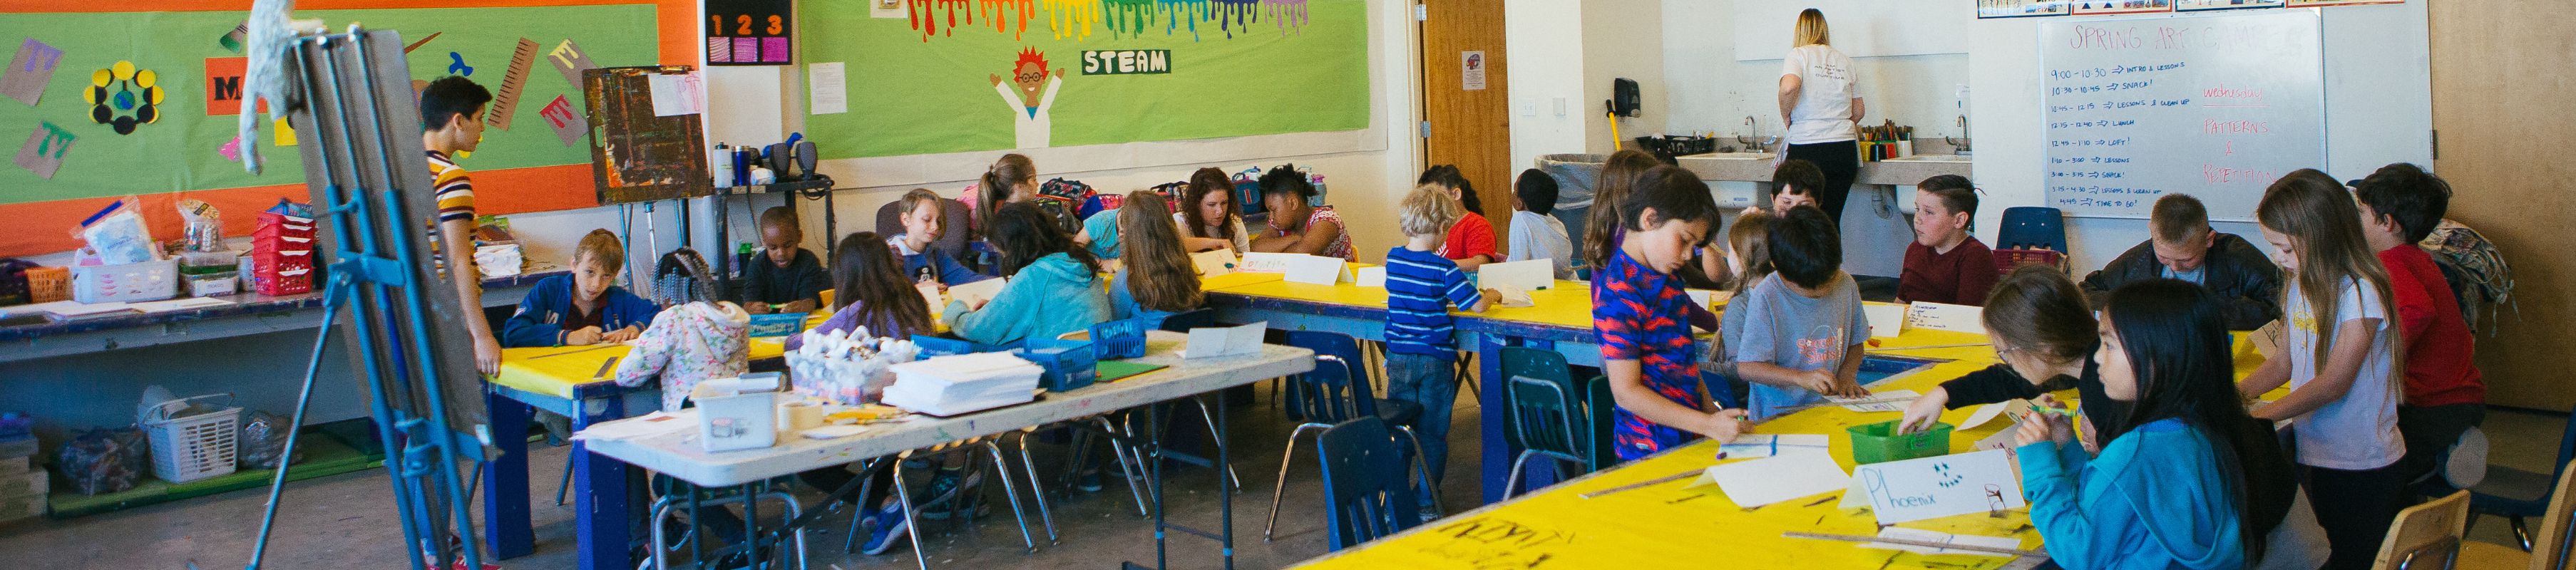 MOCA studio classroom filled with children working on art projects